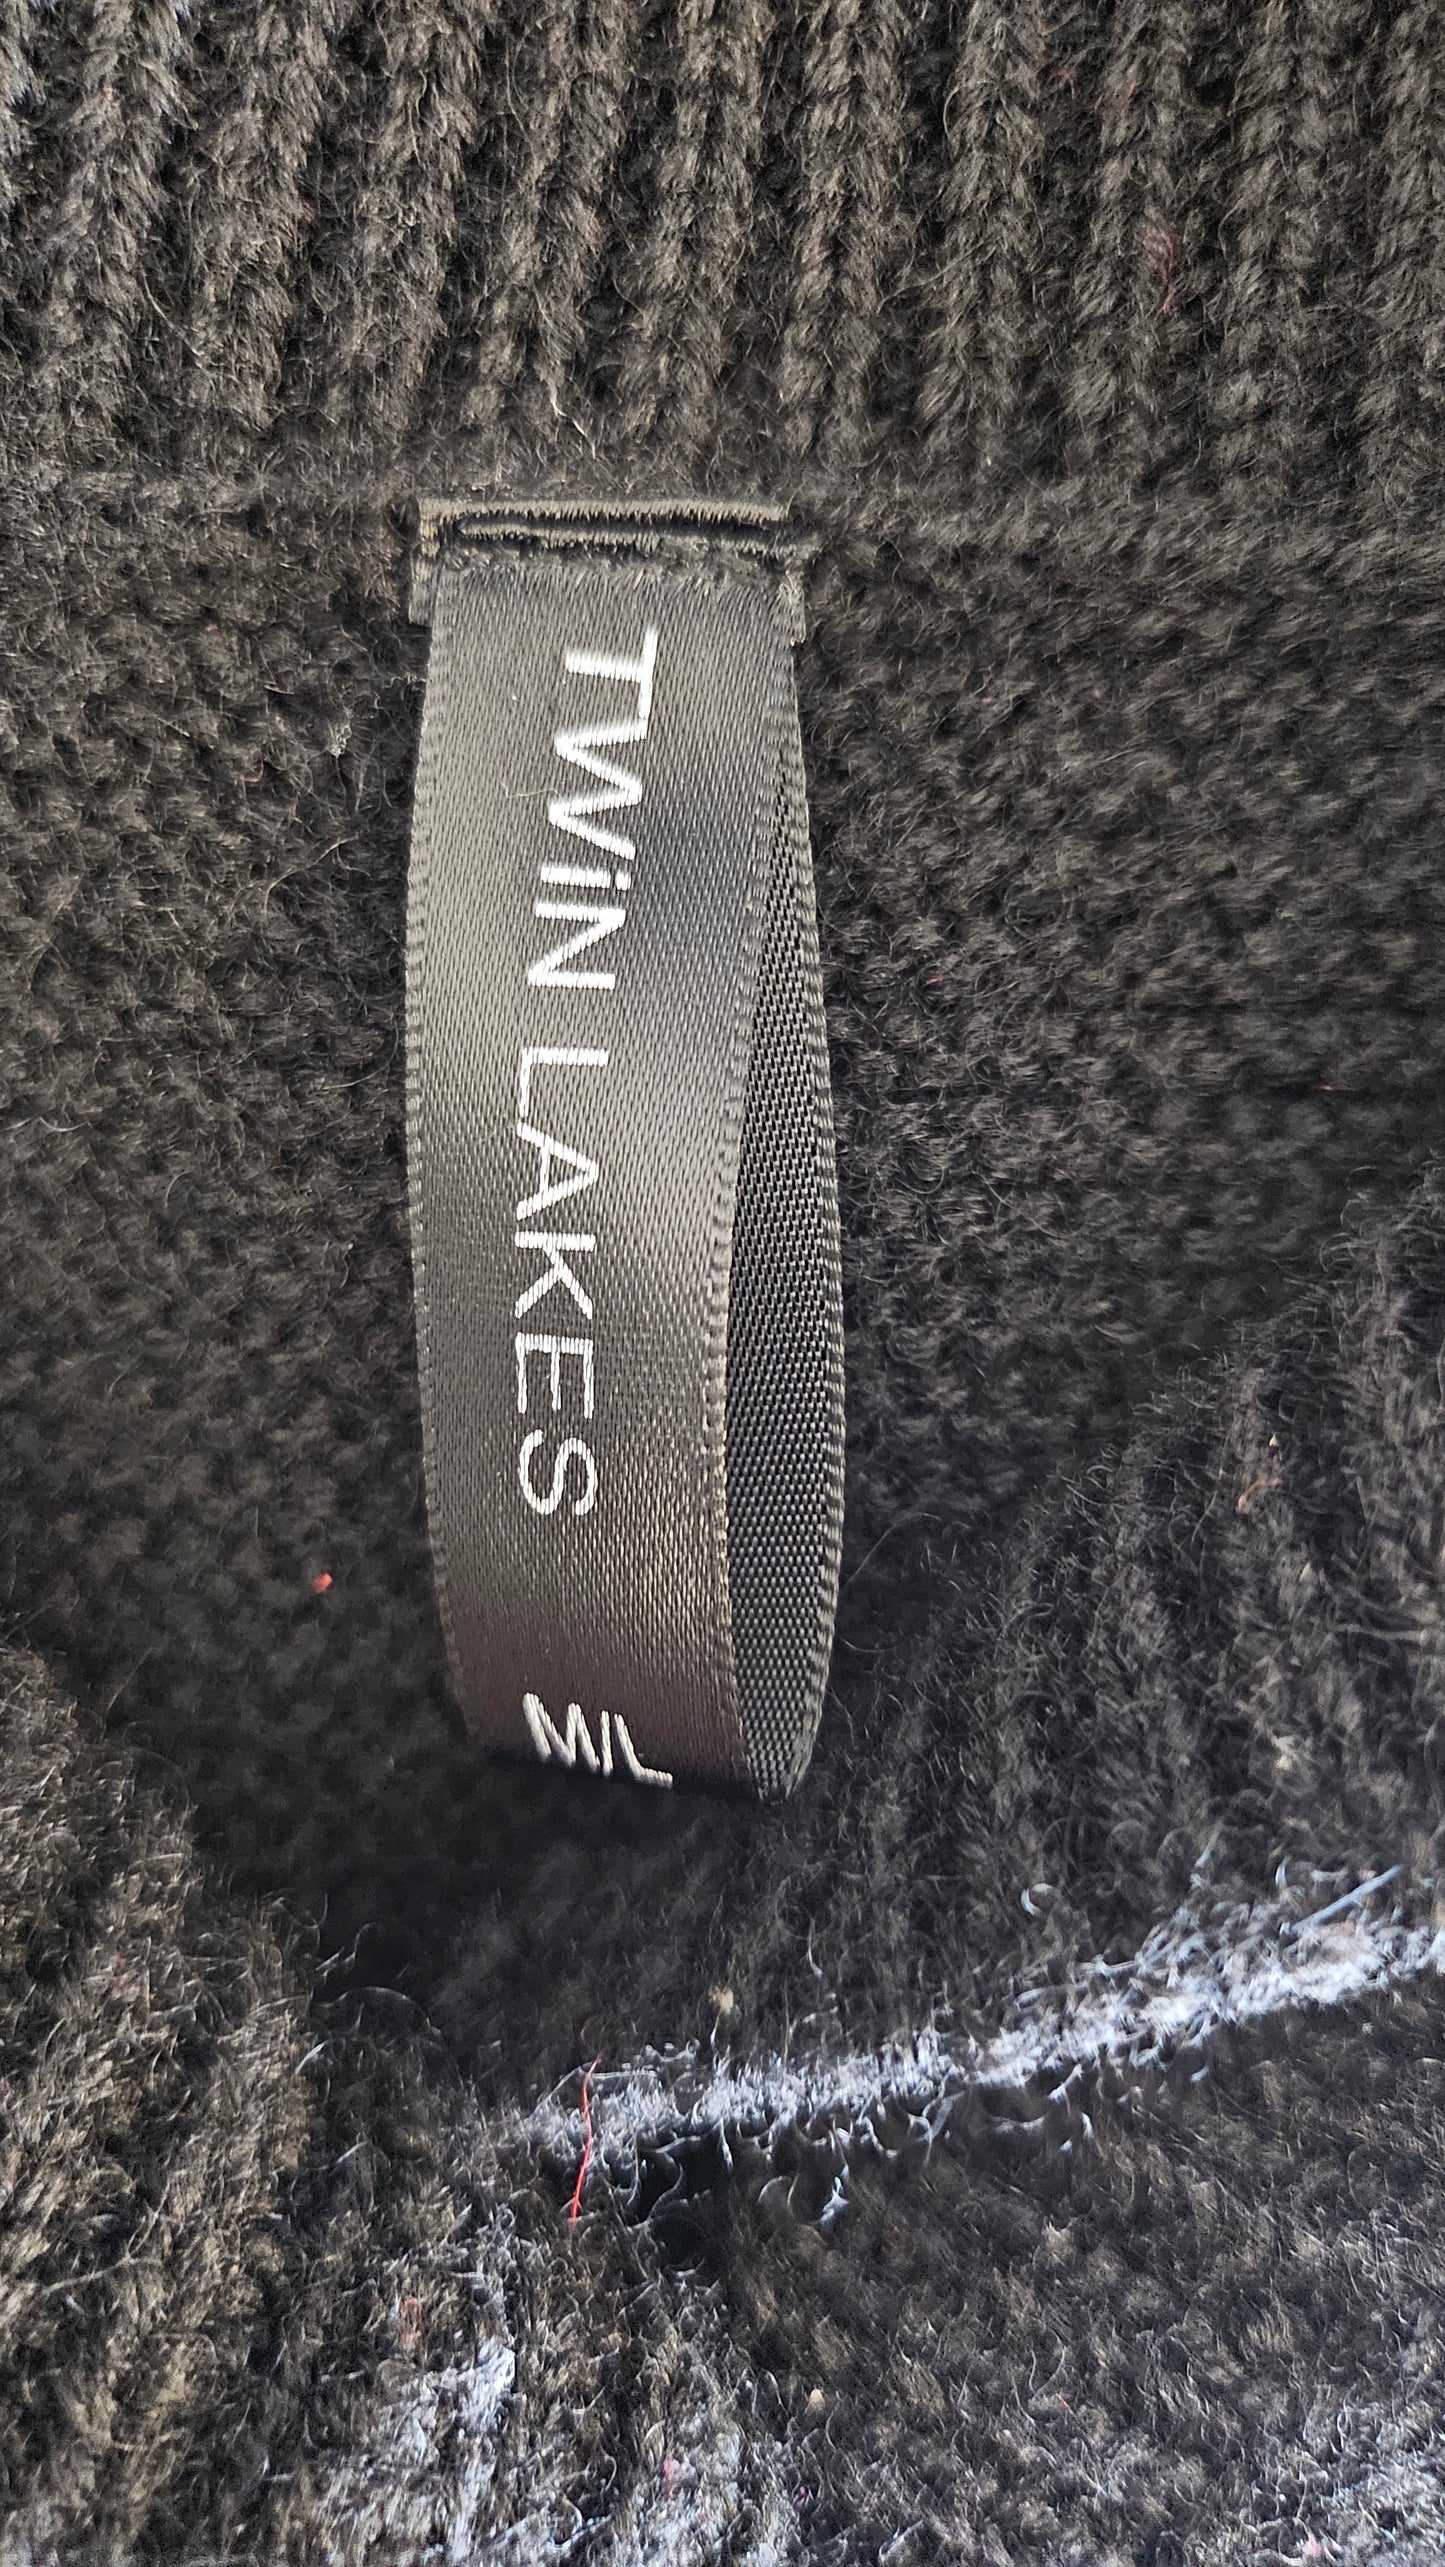 Twin Lakes Black Knitted Vest (12-14)